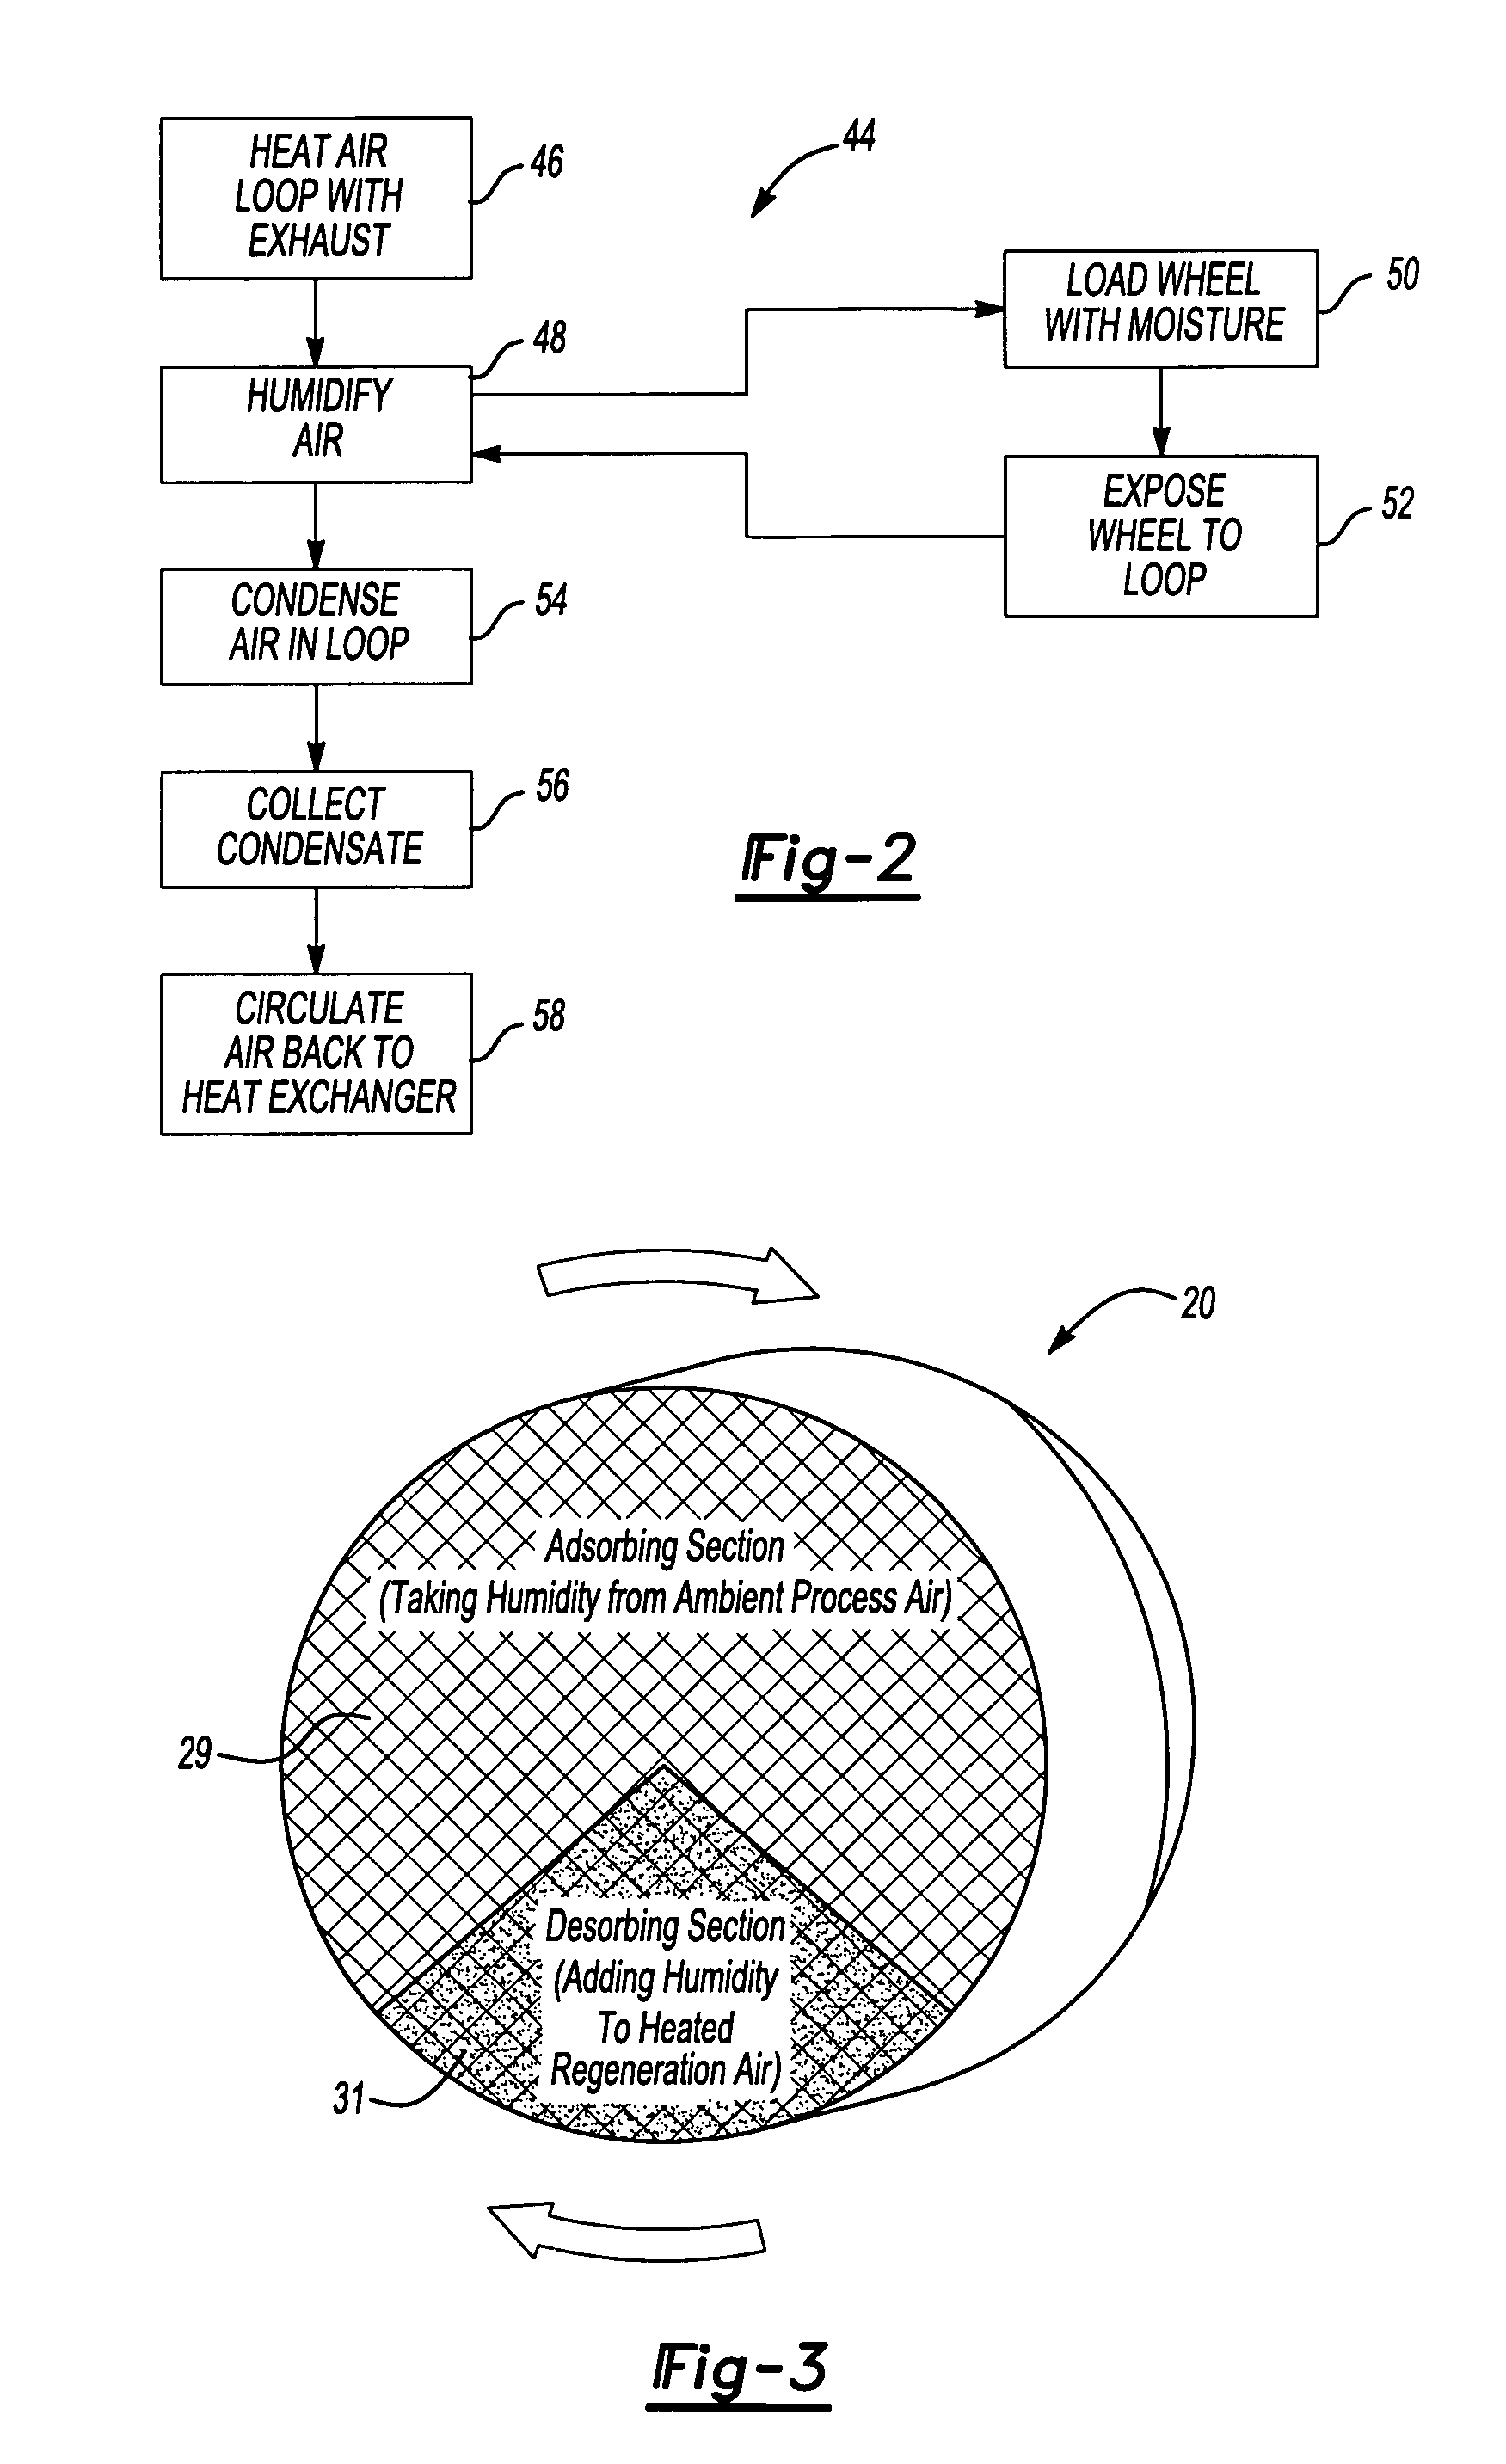 Water-from-air system using desiccant wheel and exhaust